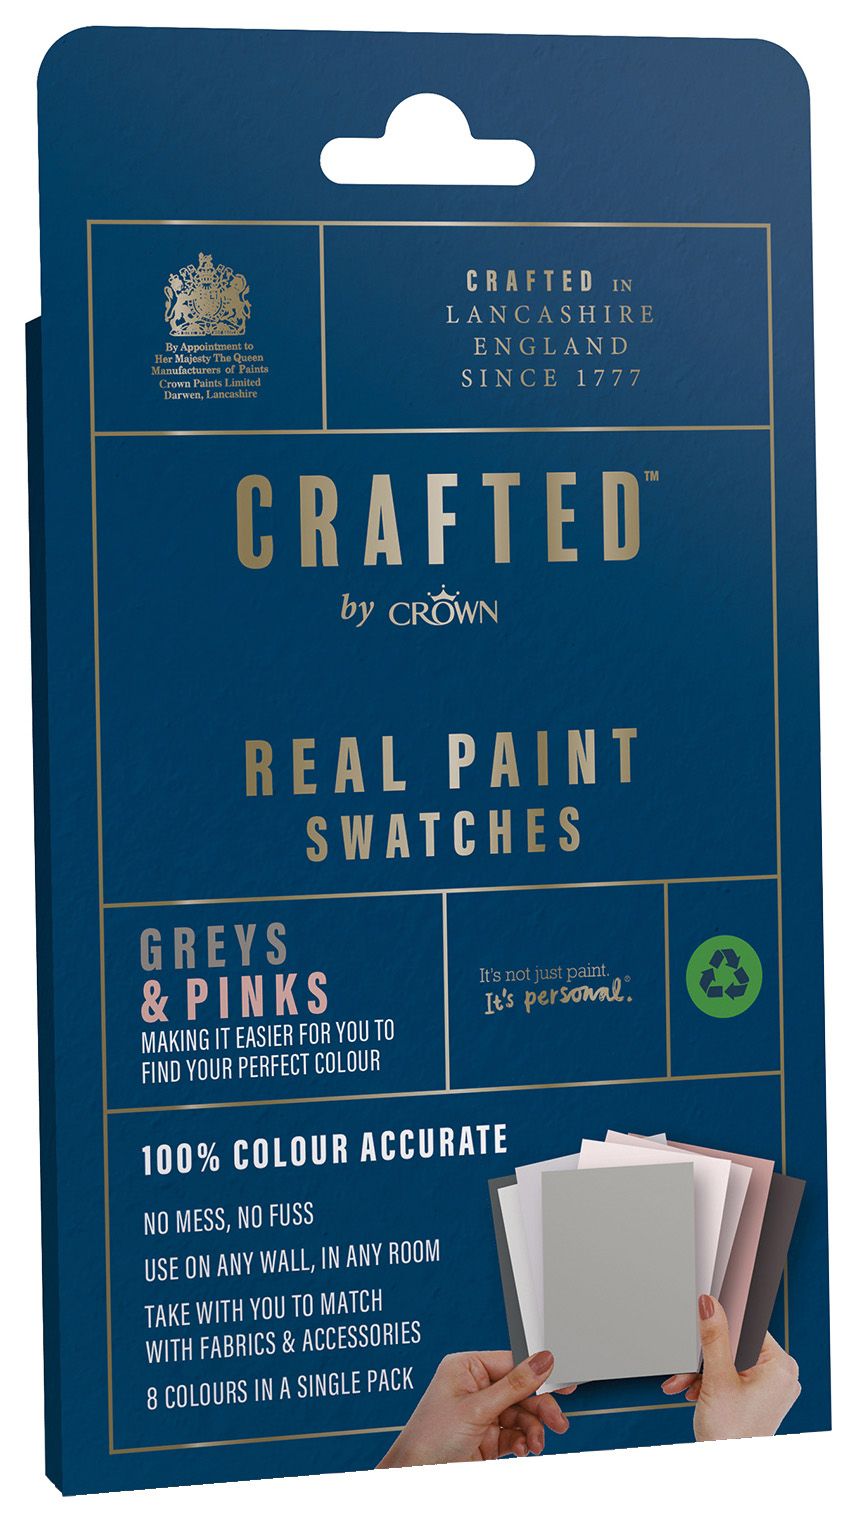 CRAFTED by Crown Flat Matt Real Paint Swatch - Grey & Pink - Pack of 8